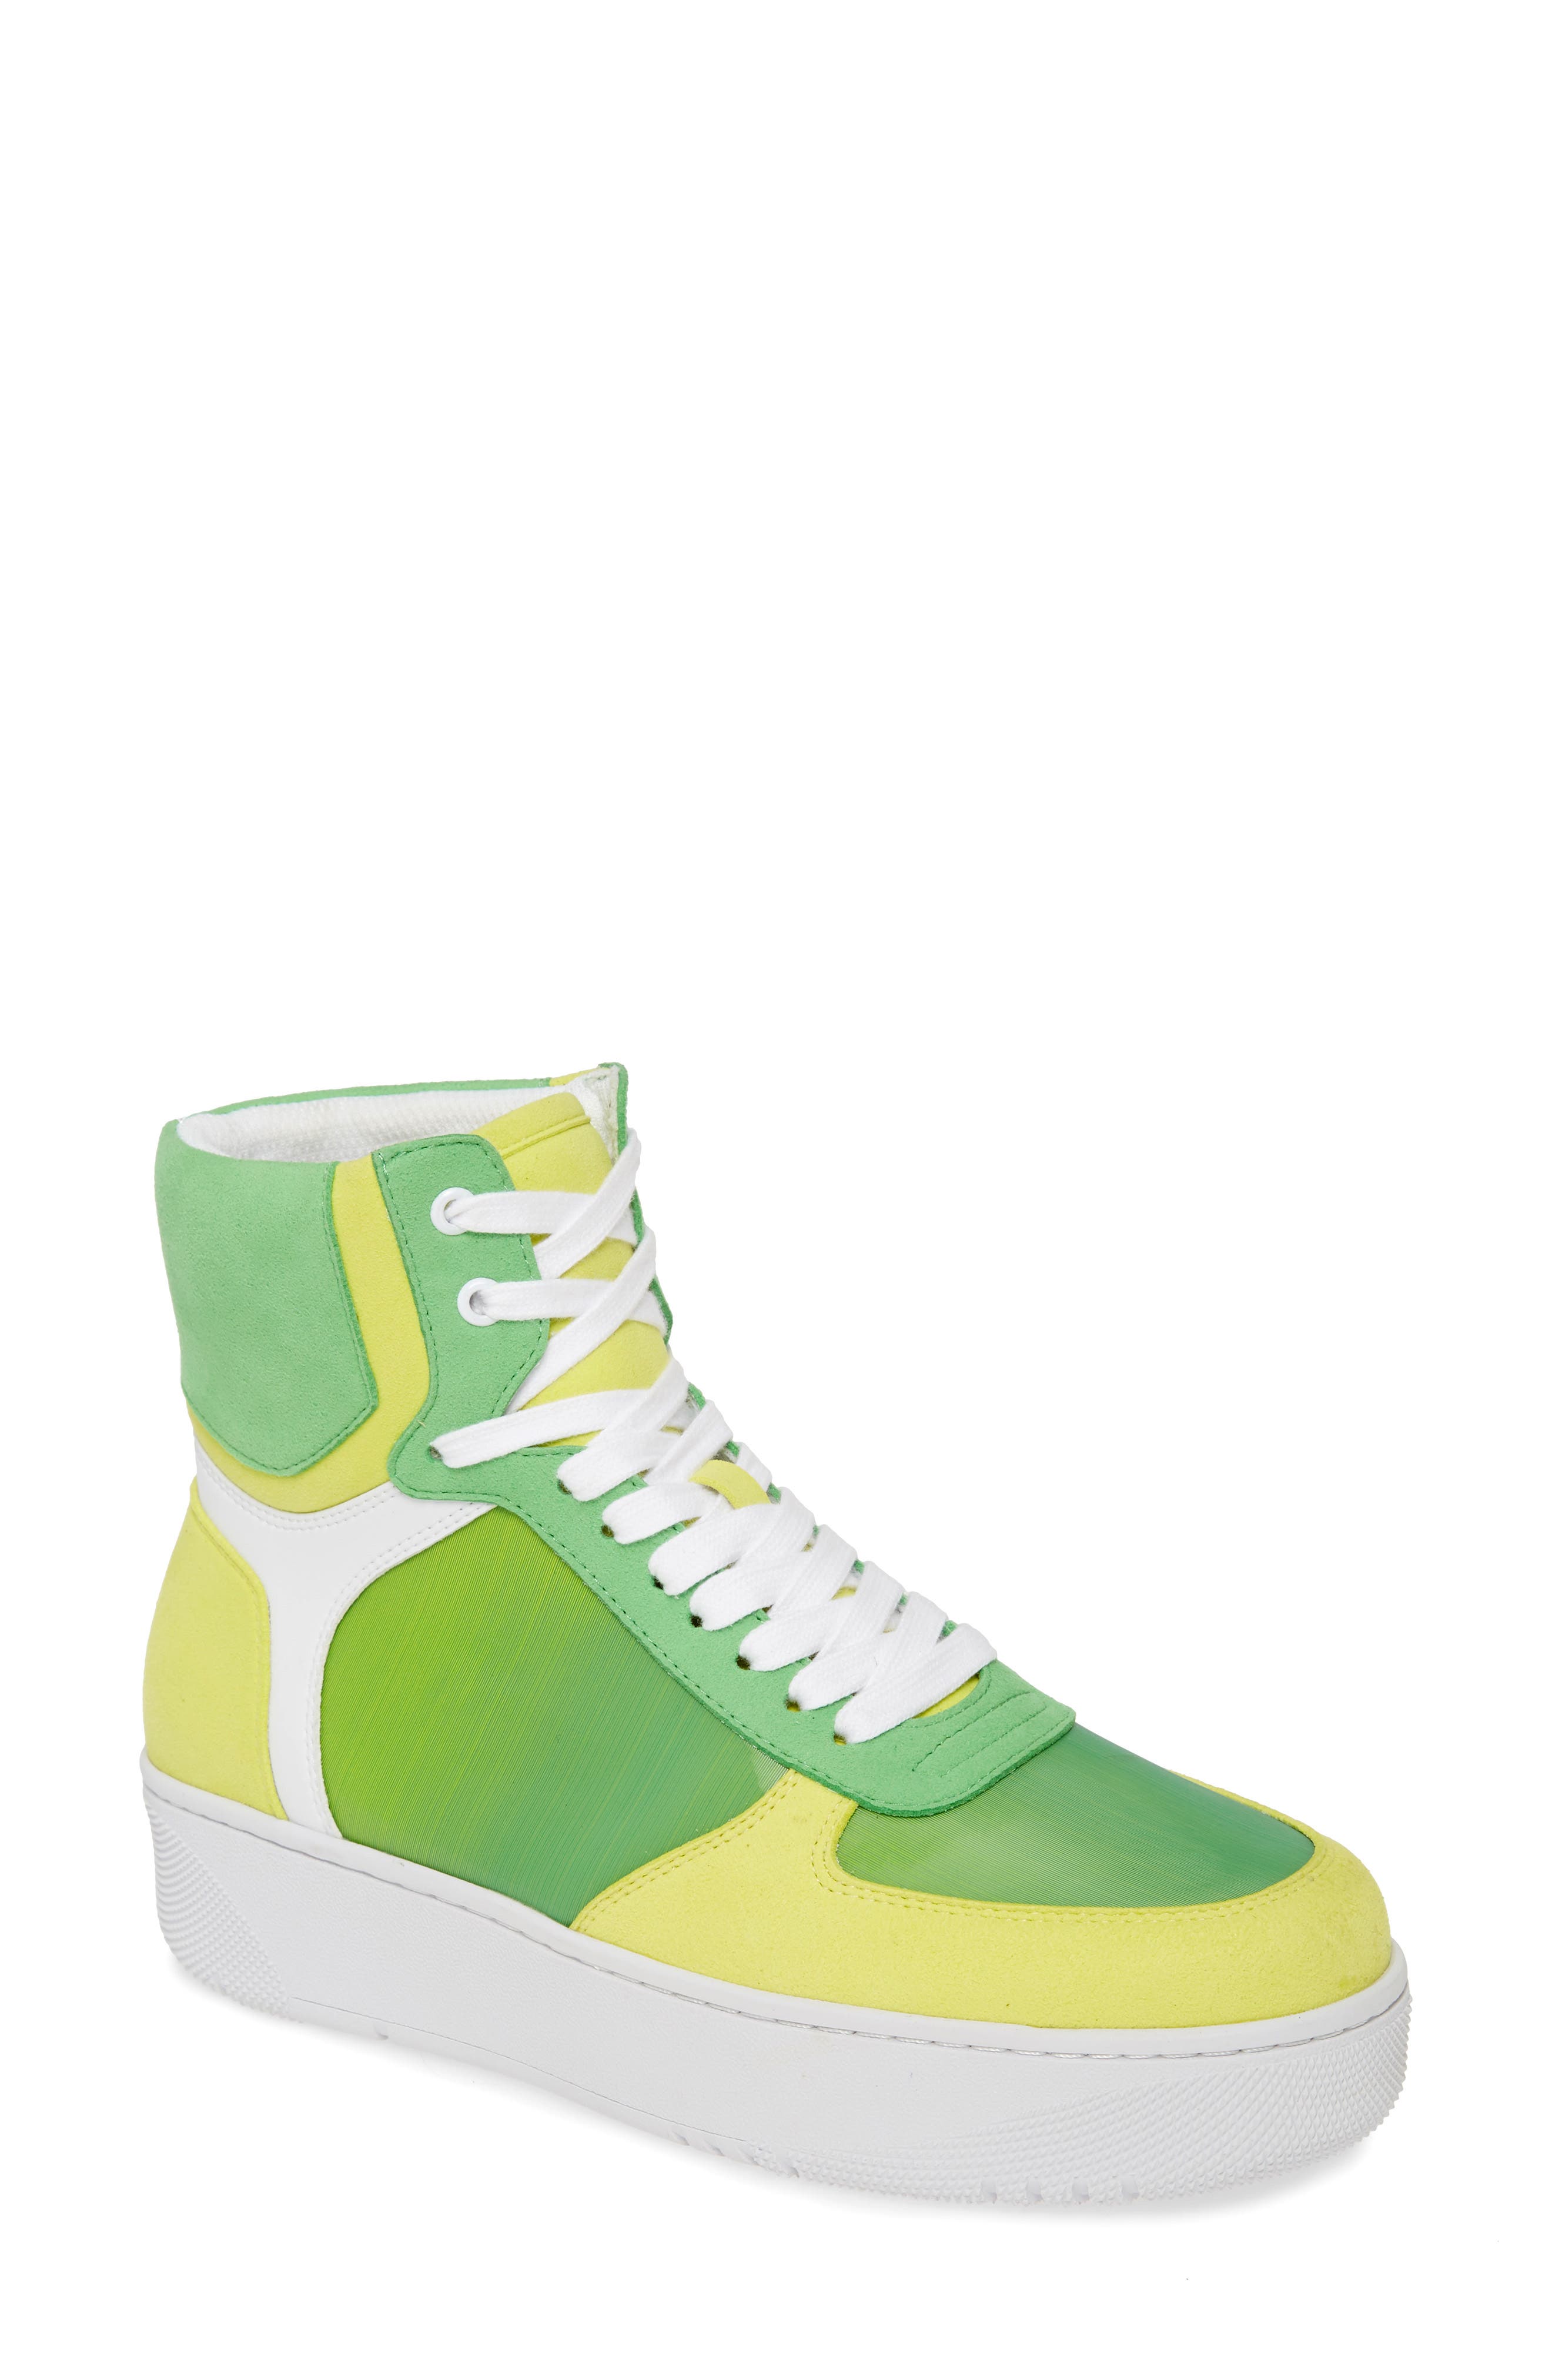 jeffrey campbell shoes sneakers